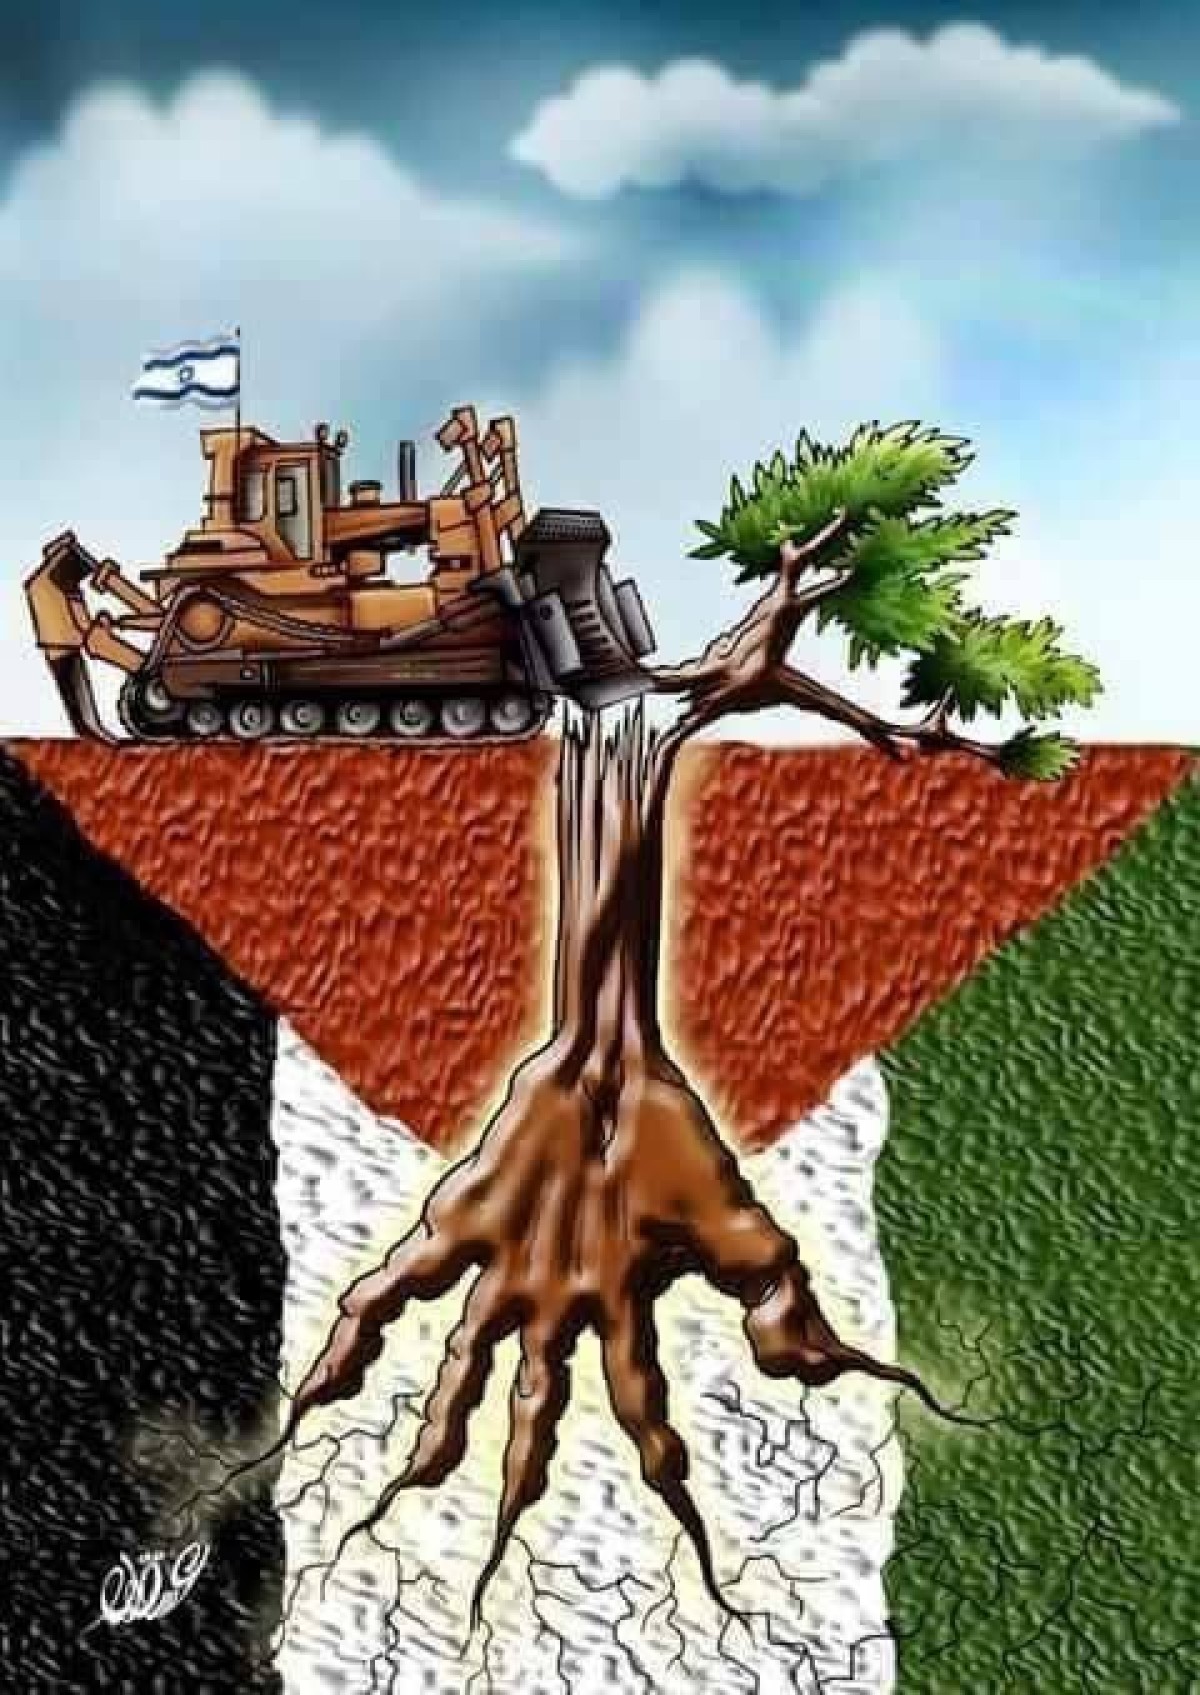 They can't uproot Palestine